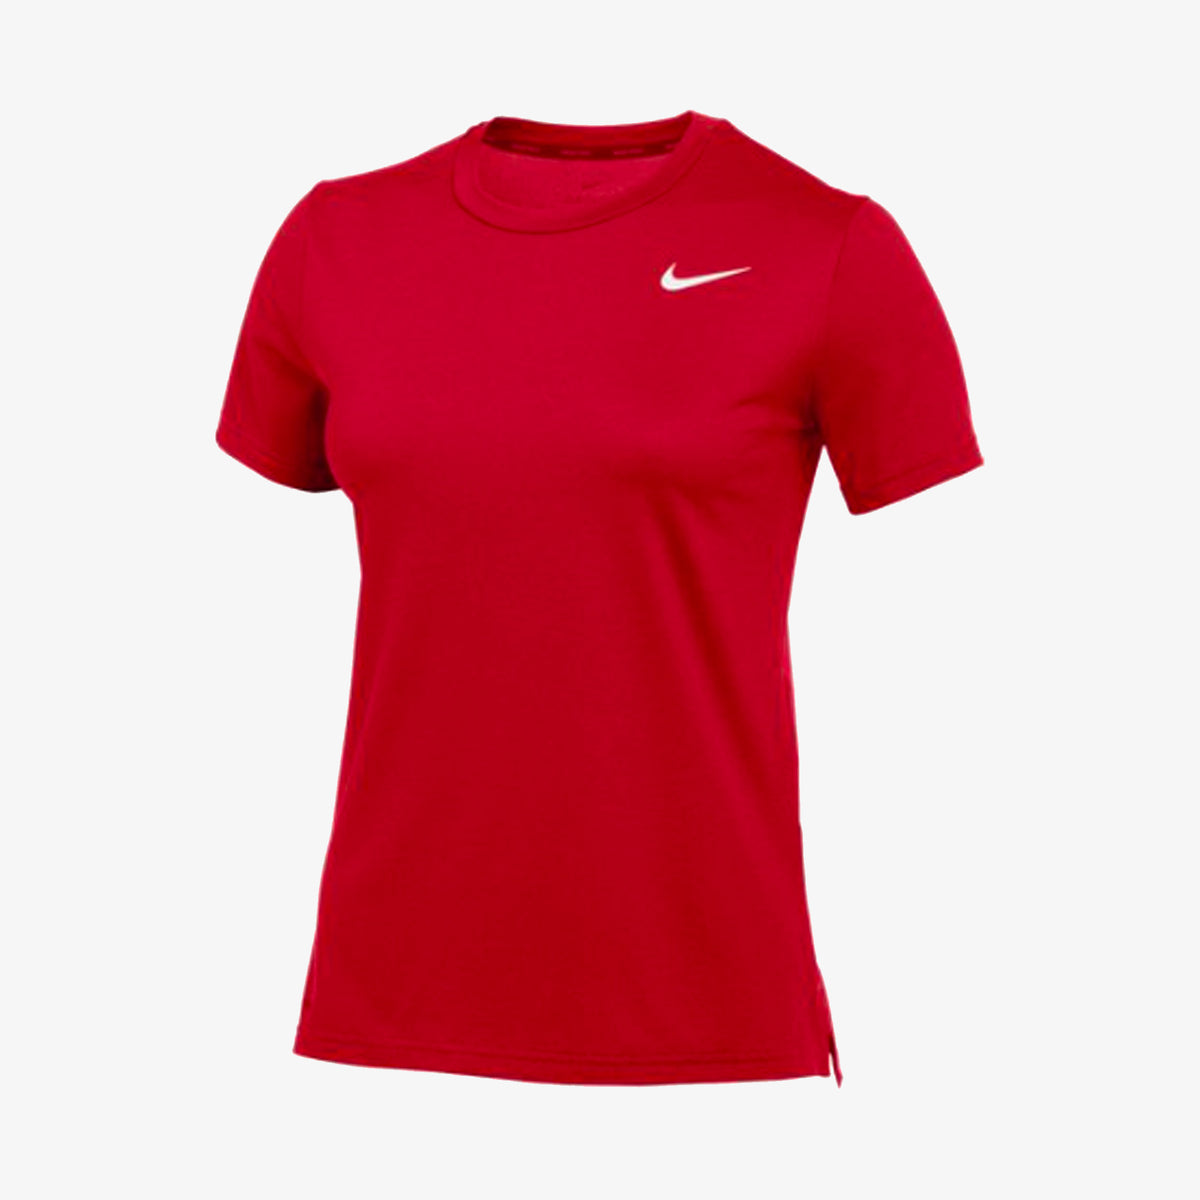 Women's Park VII Jersey - Red - Niky's Sports